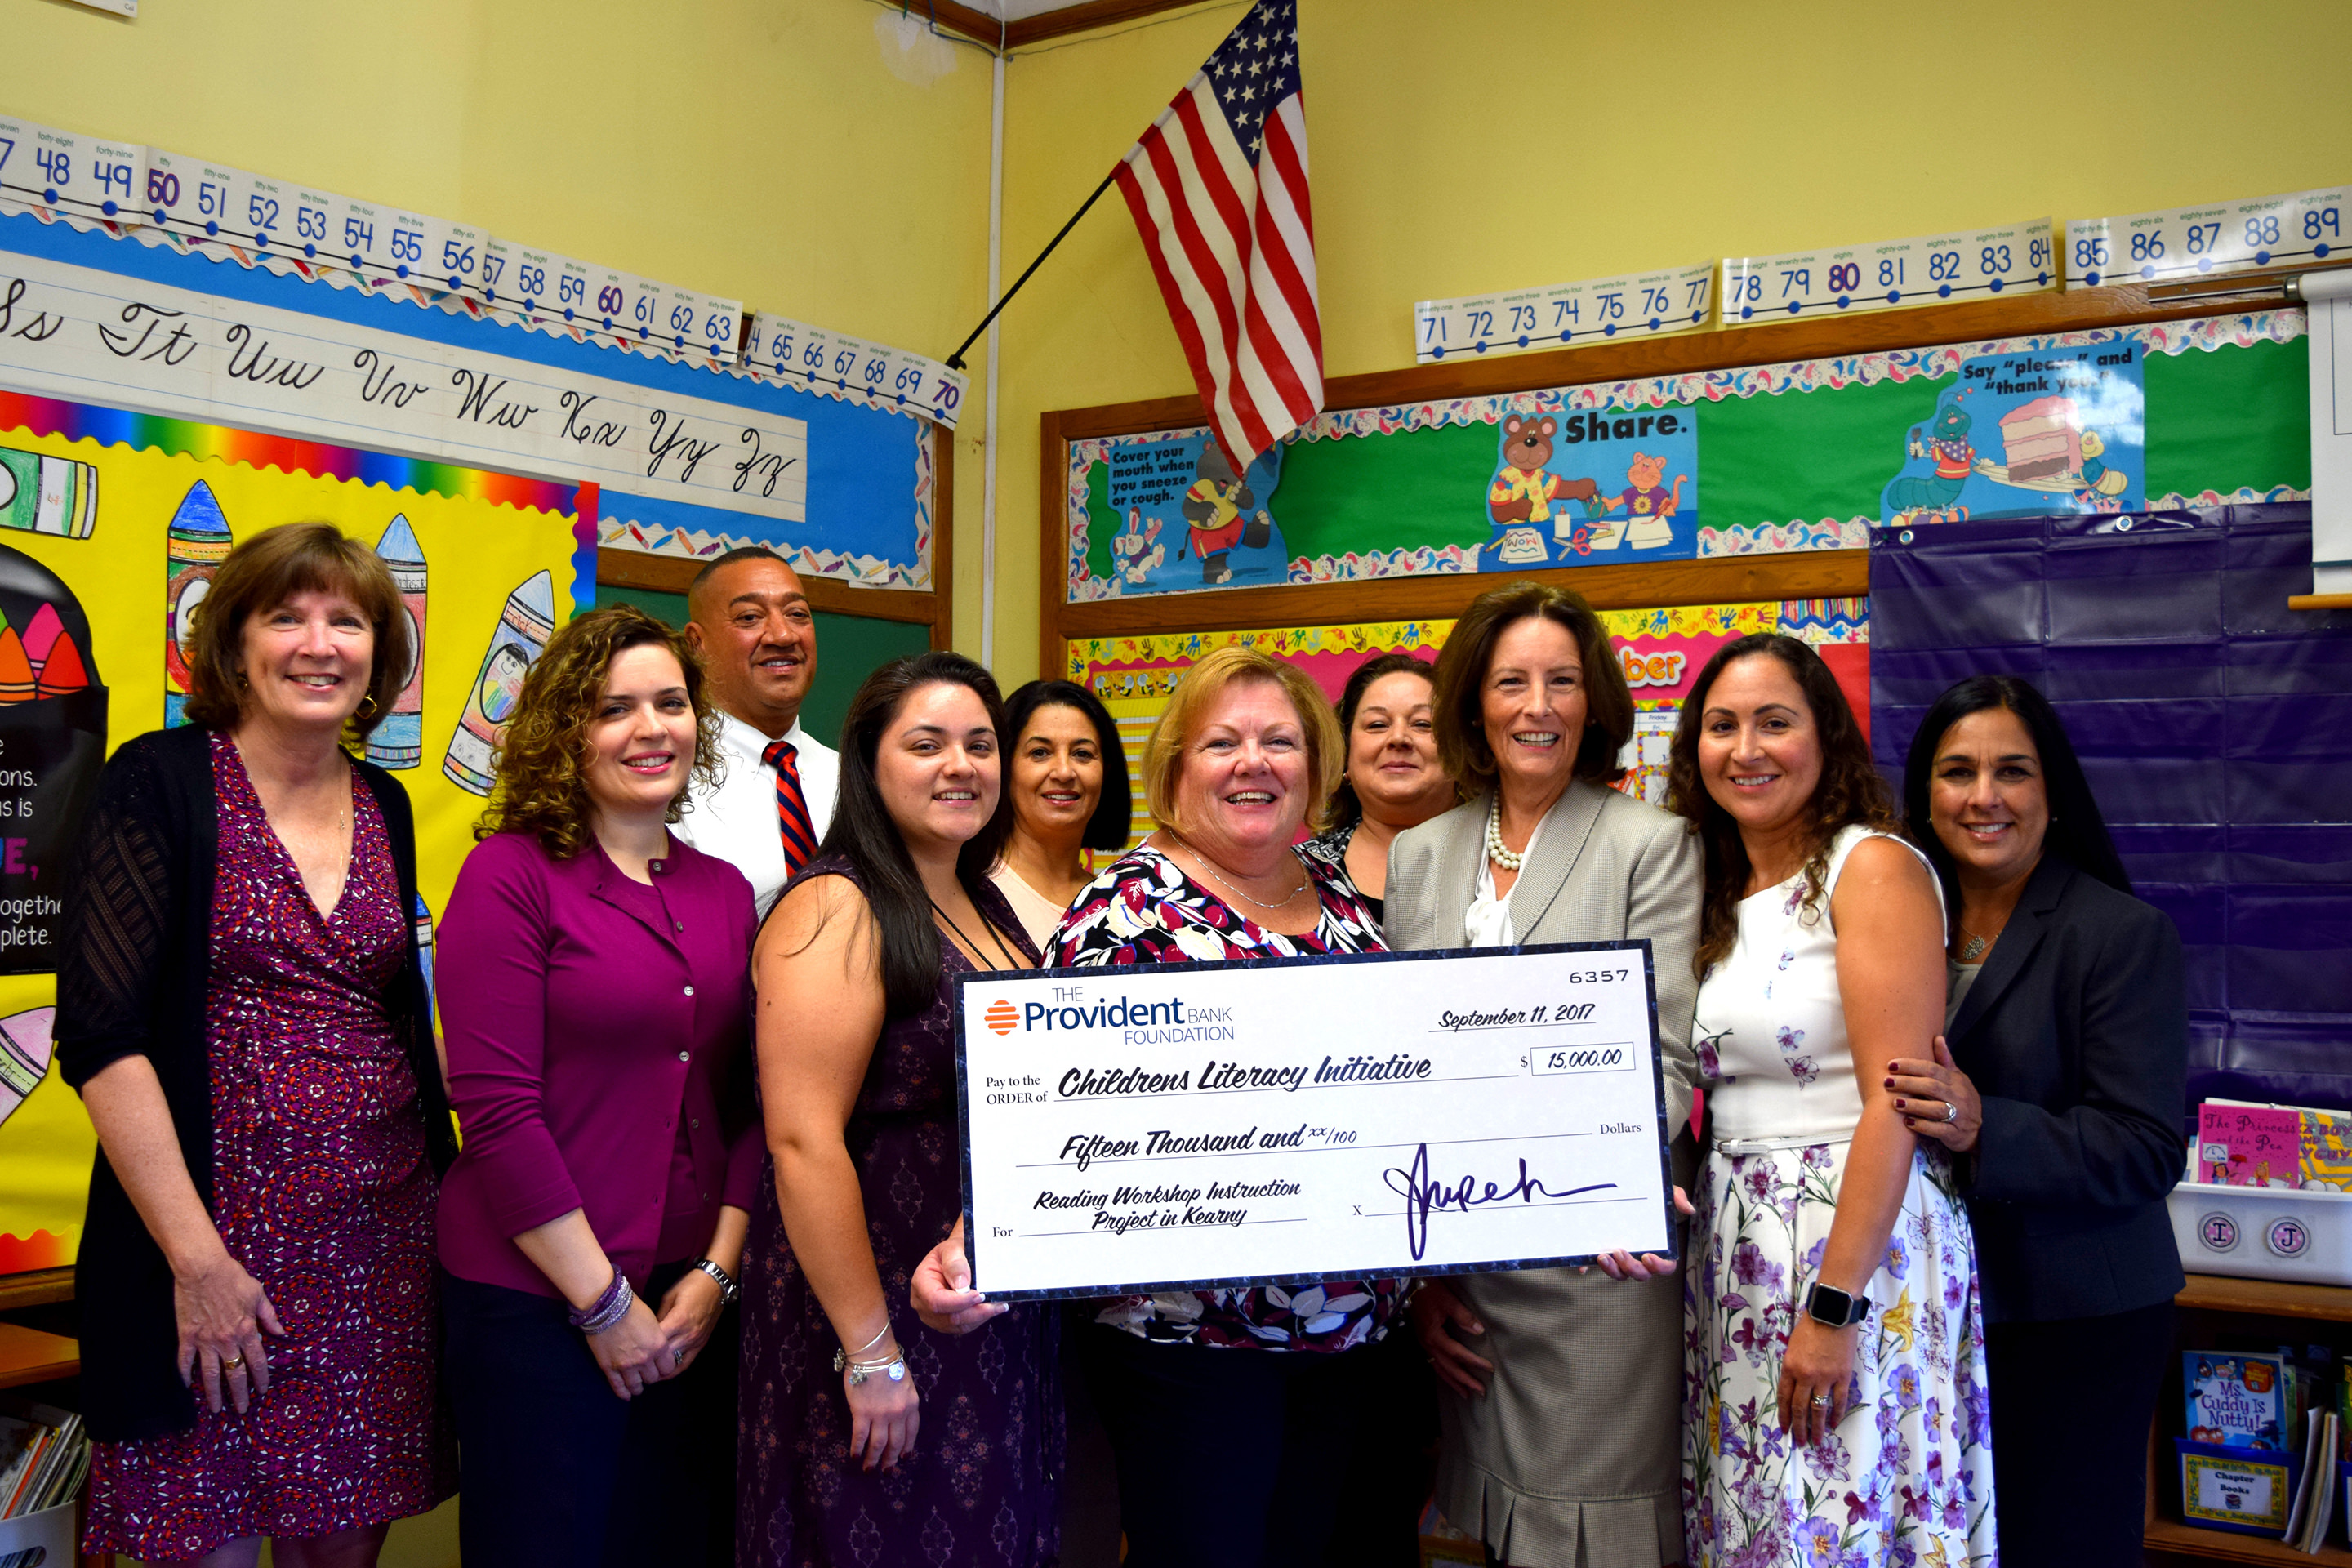 Provident Bank Foundation presents $15,000 to Children’s Literacy Initiative (CLI) for a Reading Workshop Instruction Project for 1st and 2nd grade teachers in Kearny, New Jersey, School District. Gat